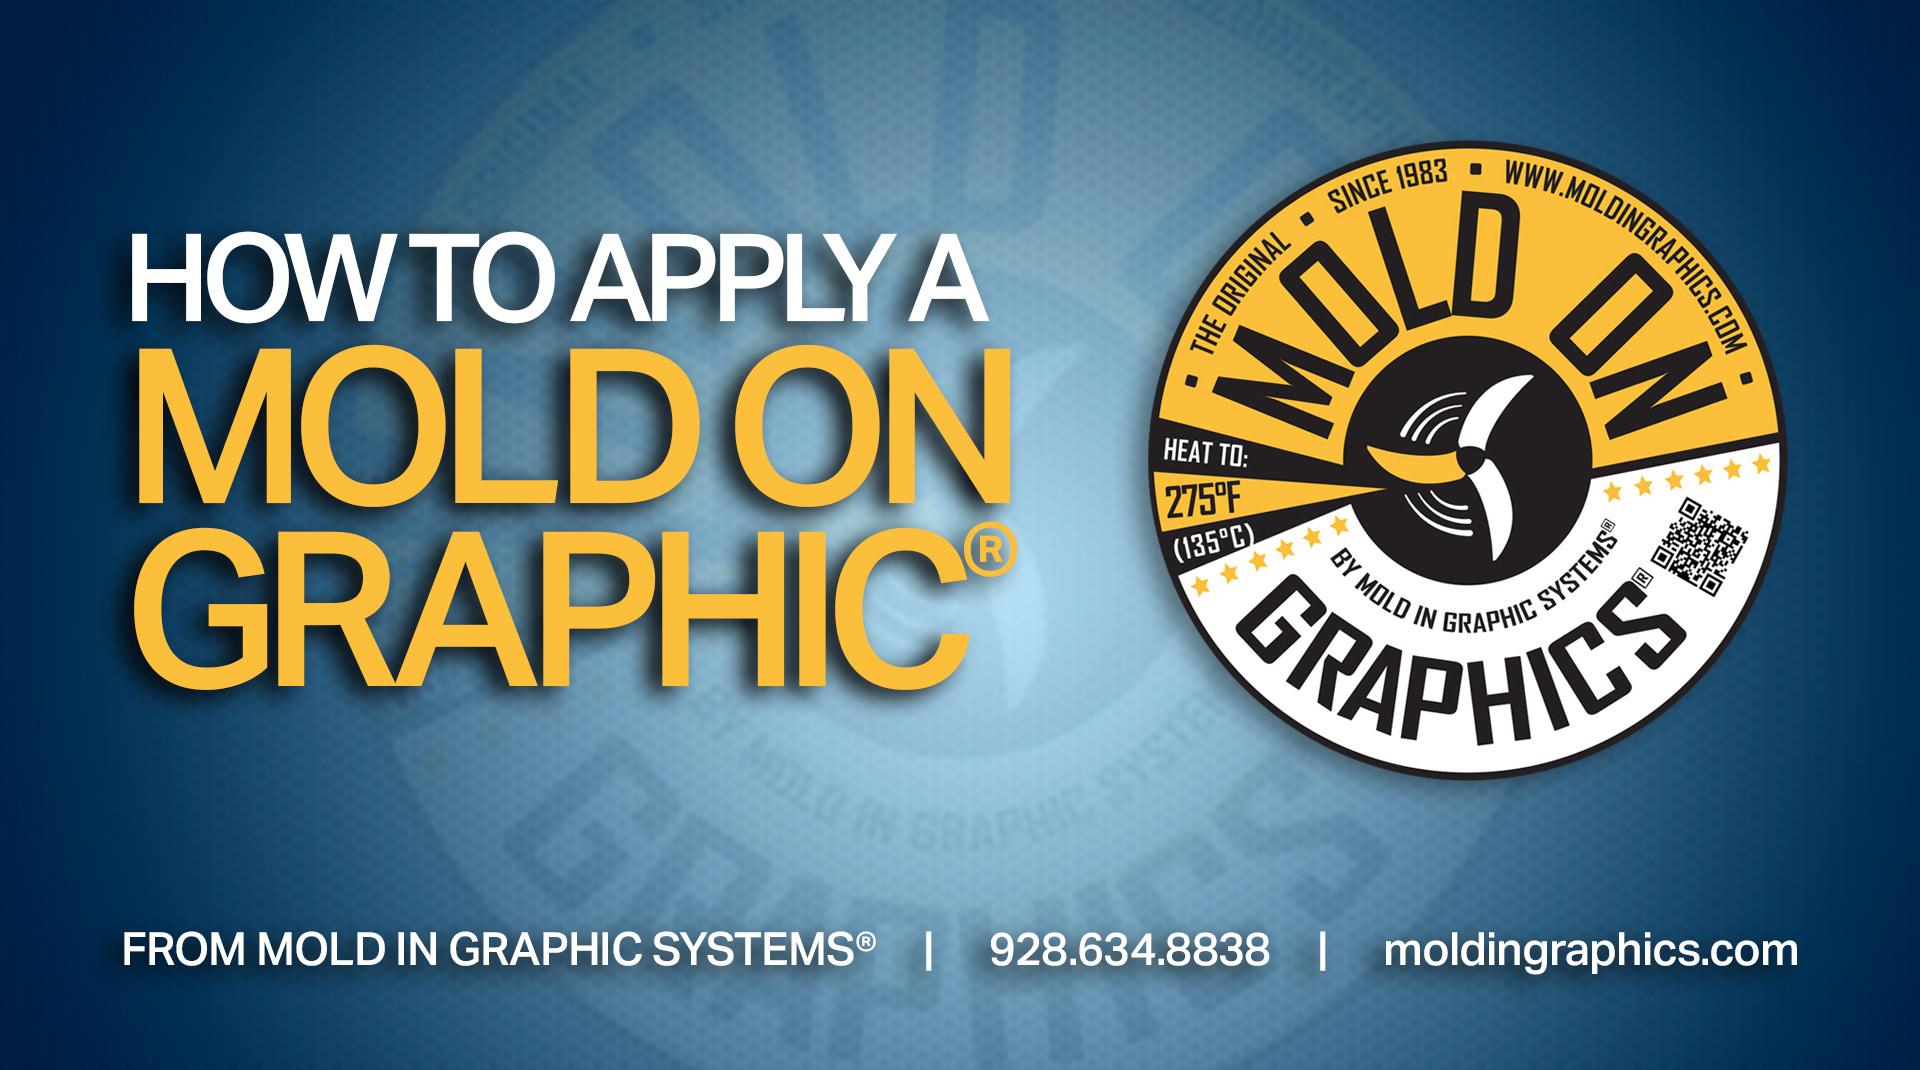 MIGS_MoldOnGraphic_old_VidFeature